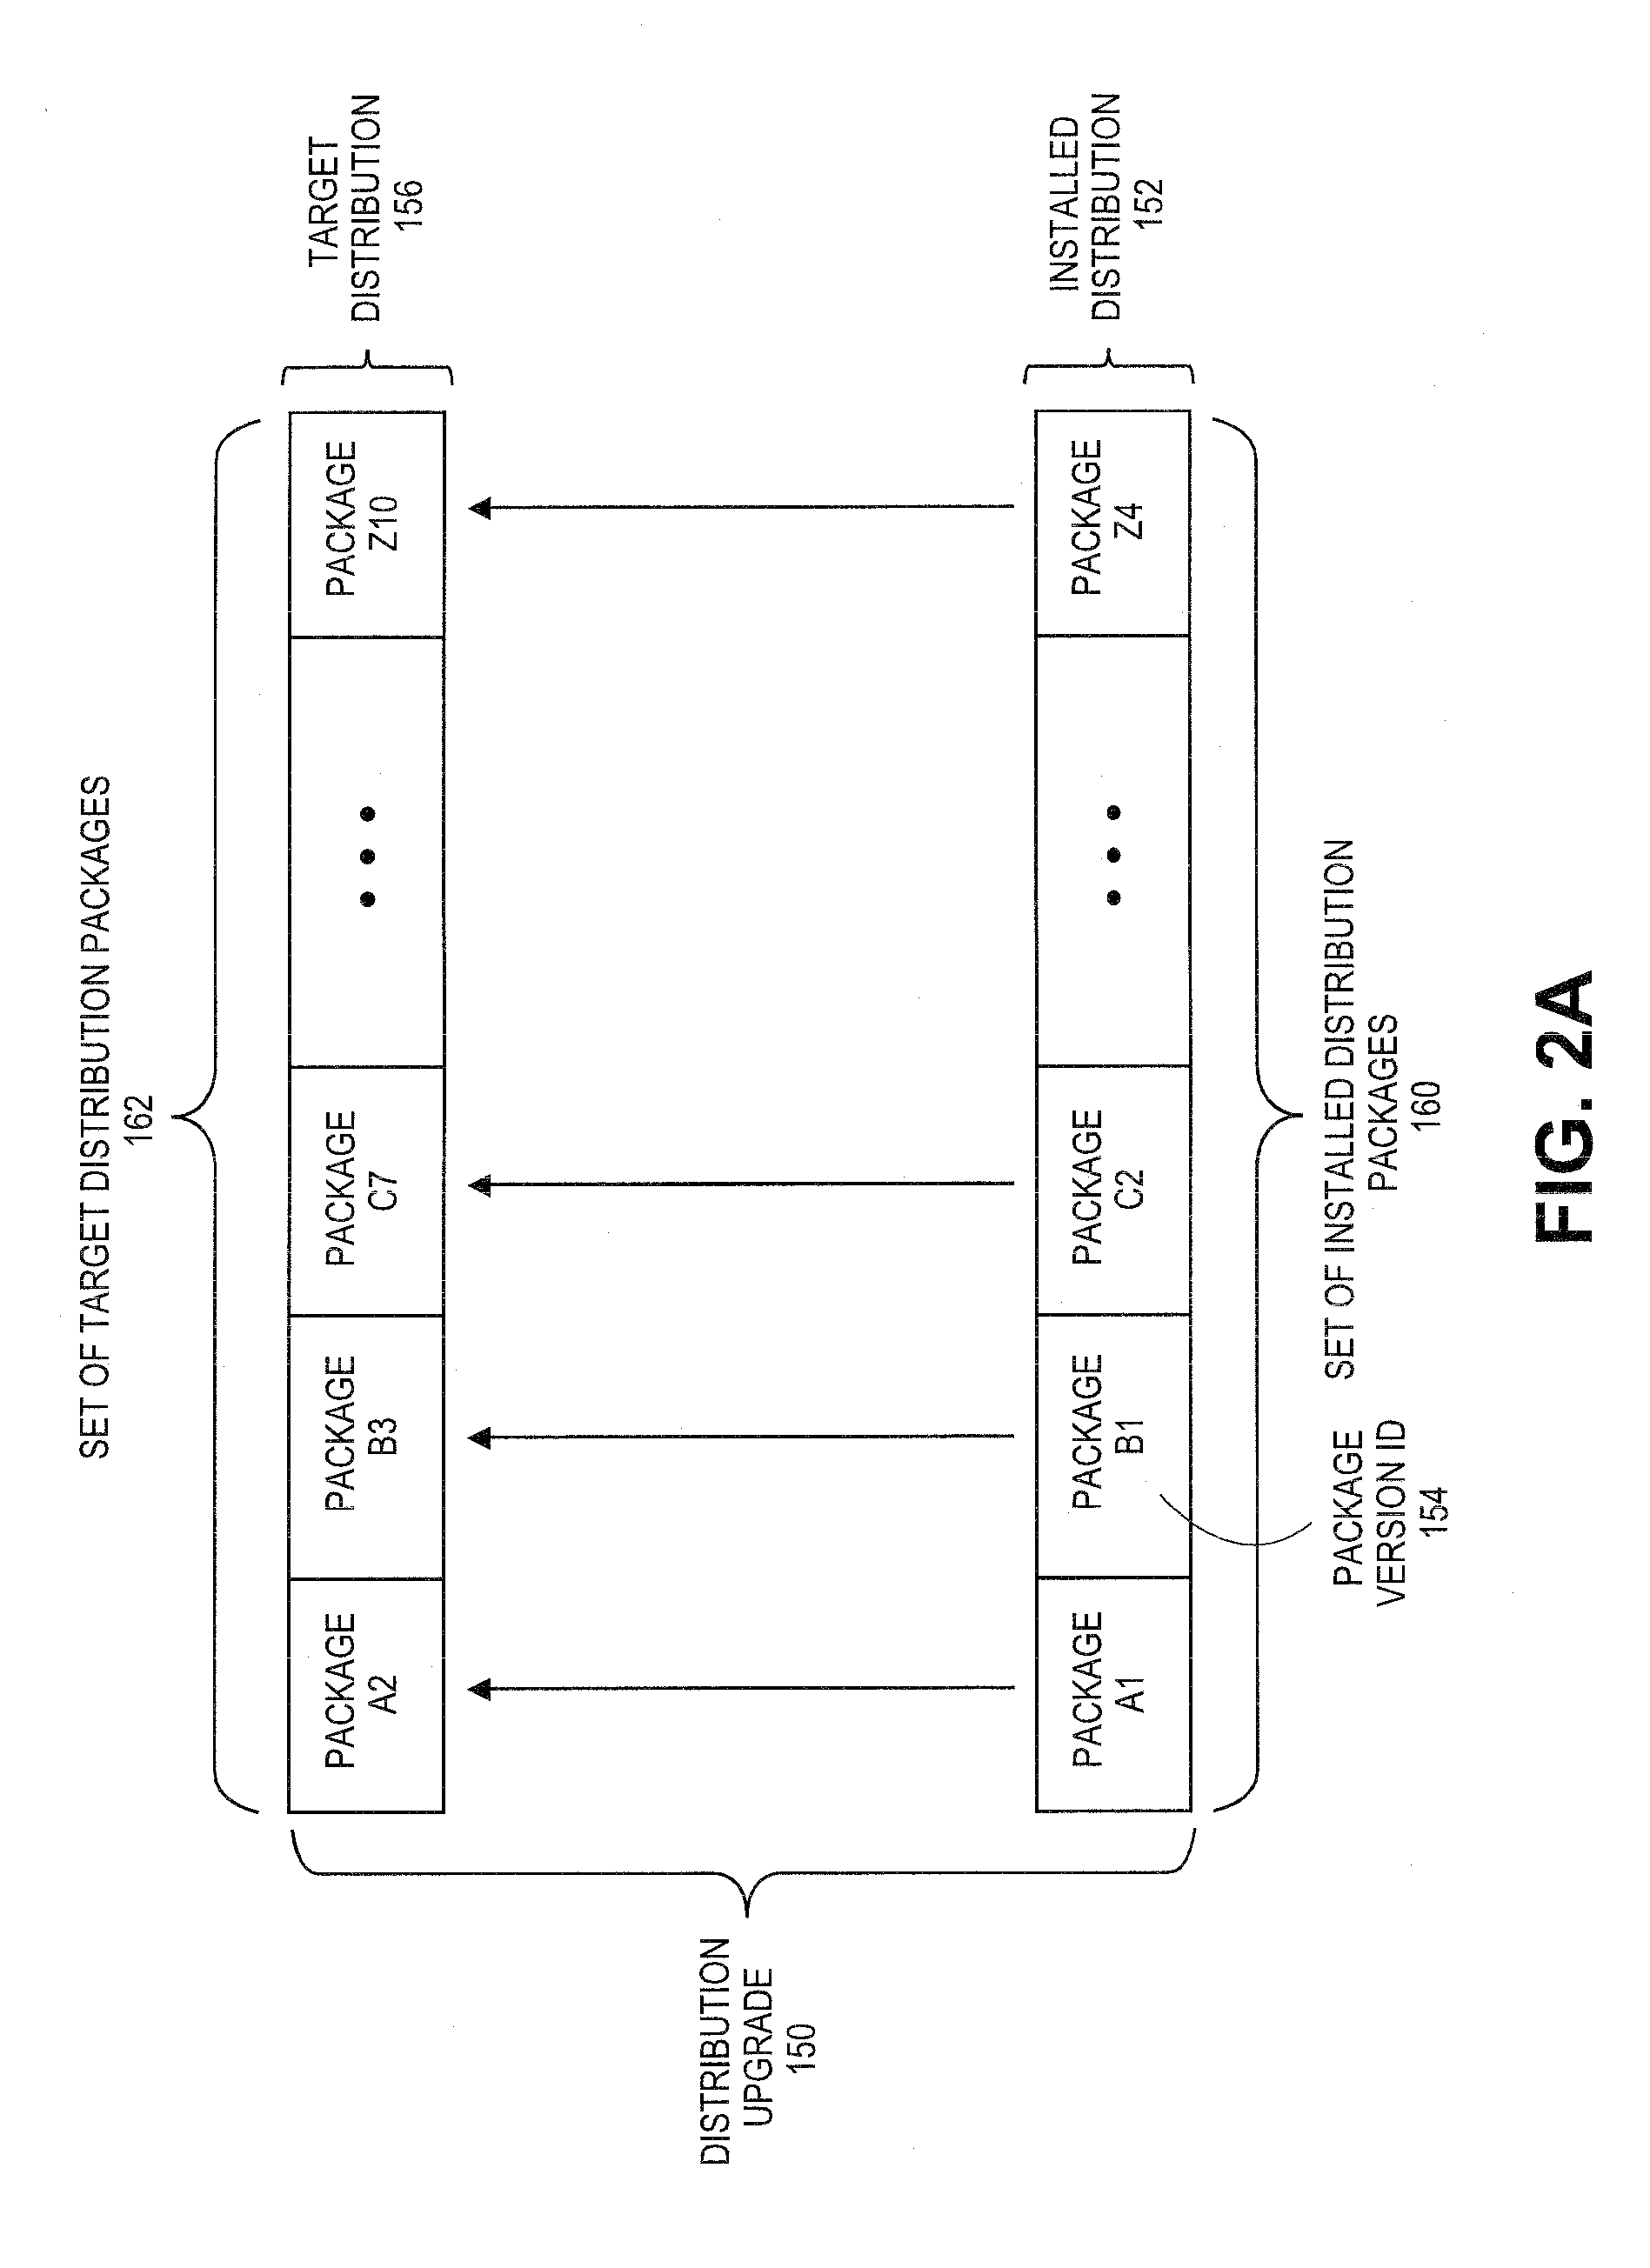 Systems and methods for automatic upgrade and downgrade in package update operations